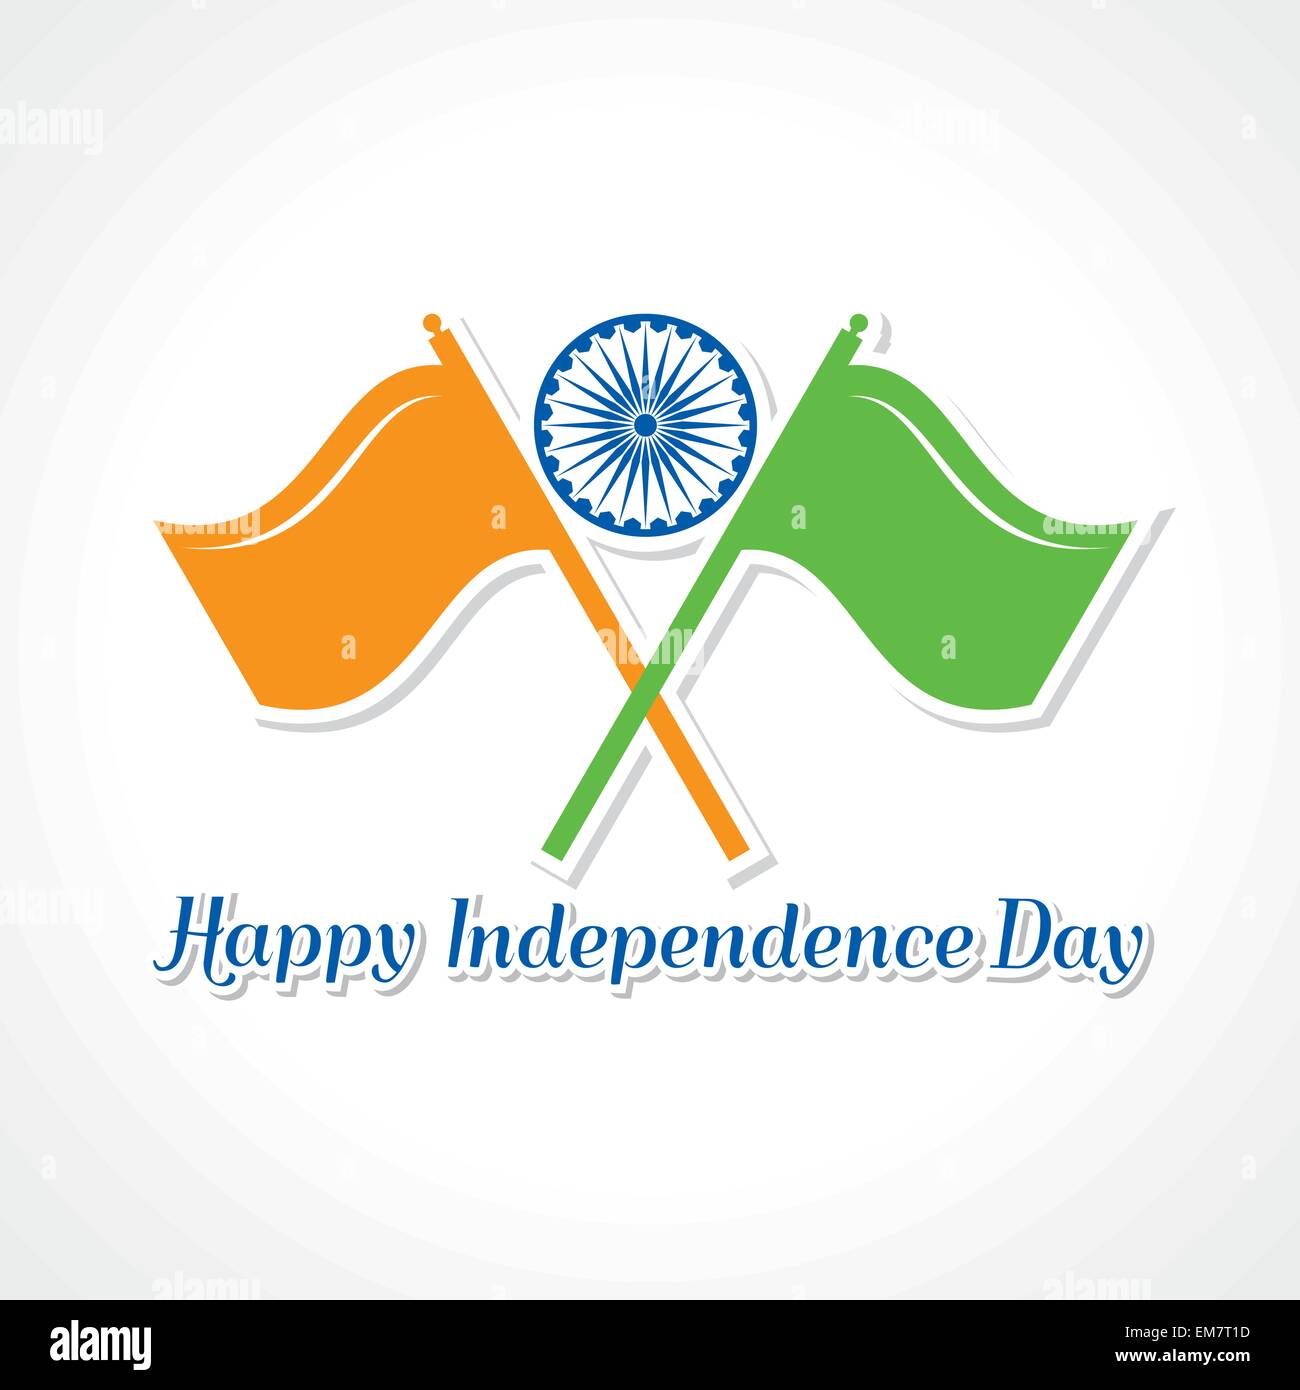 Happy independence day greeting card Stock Vector